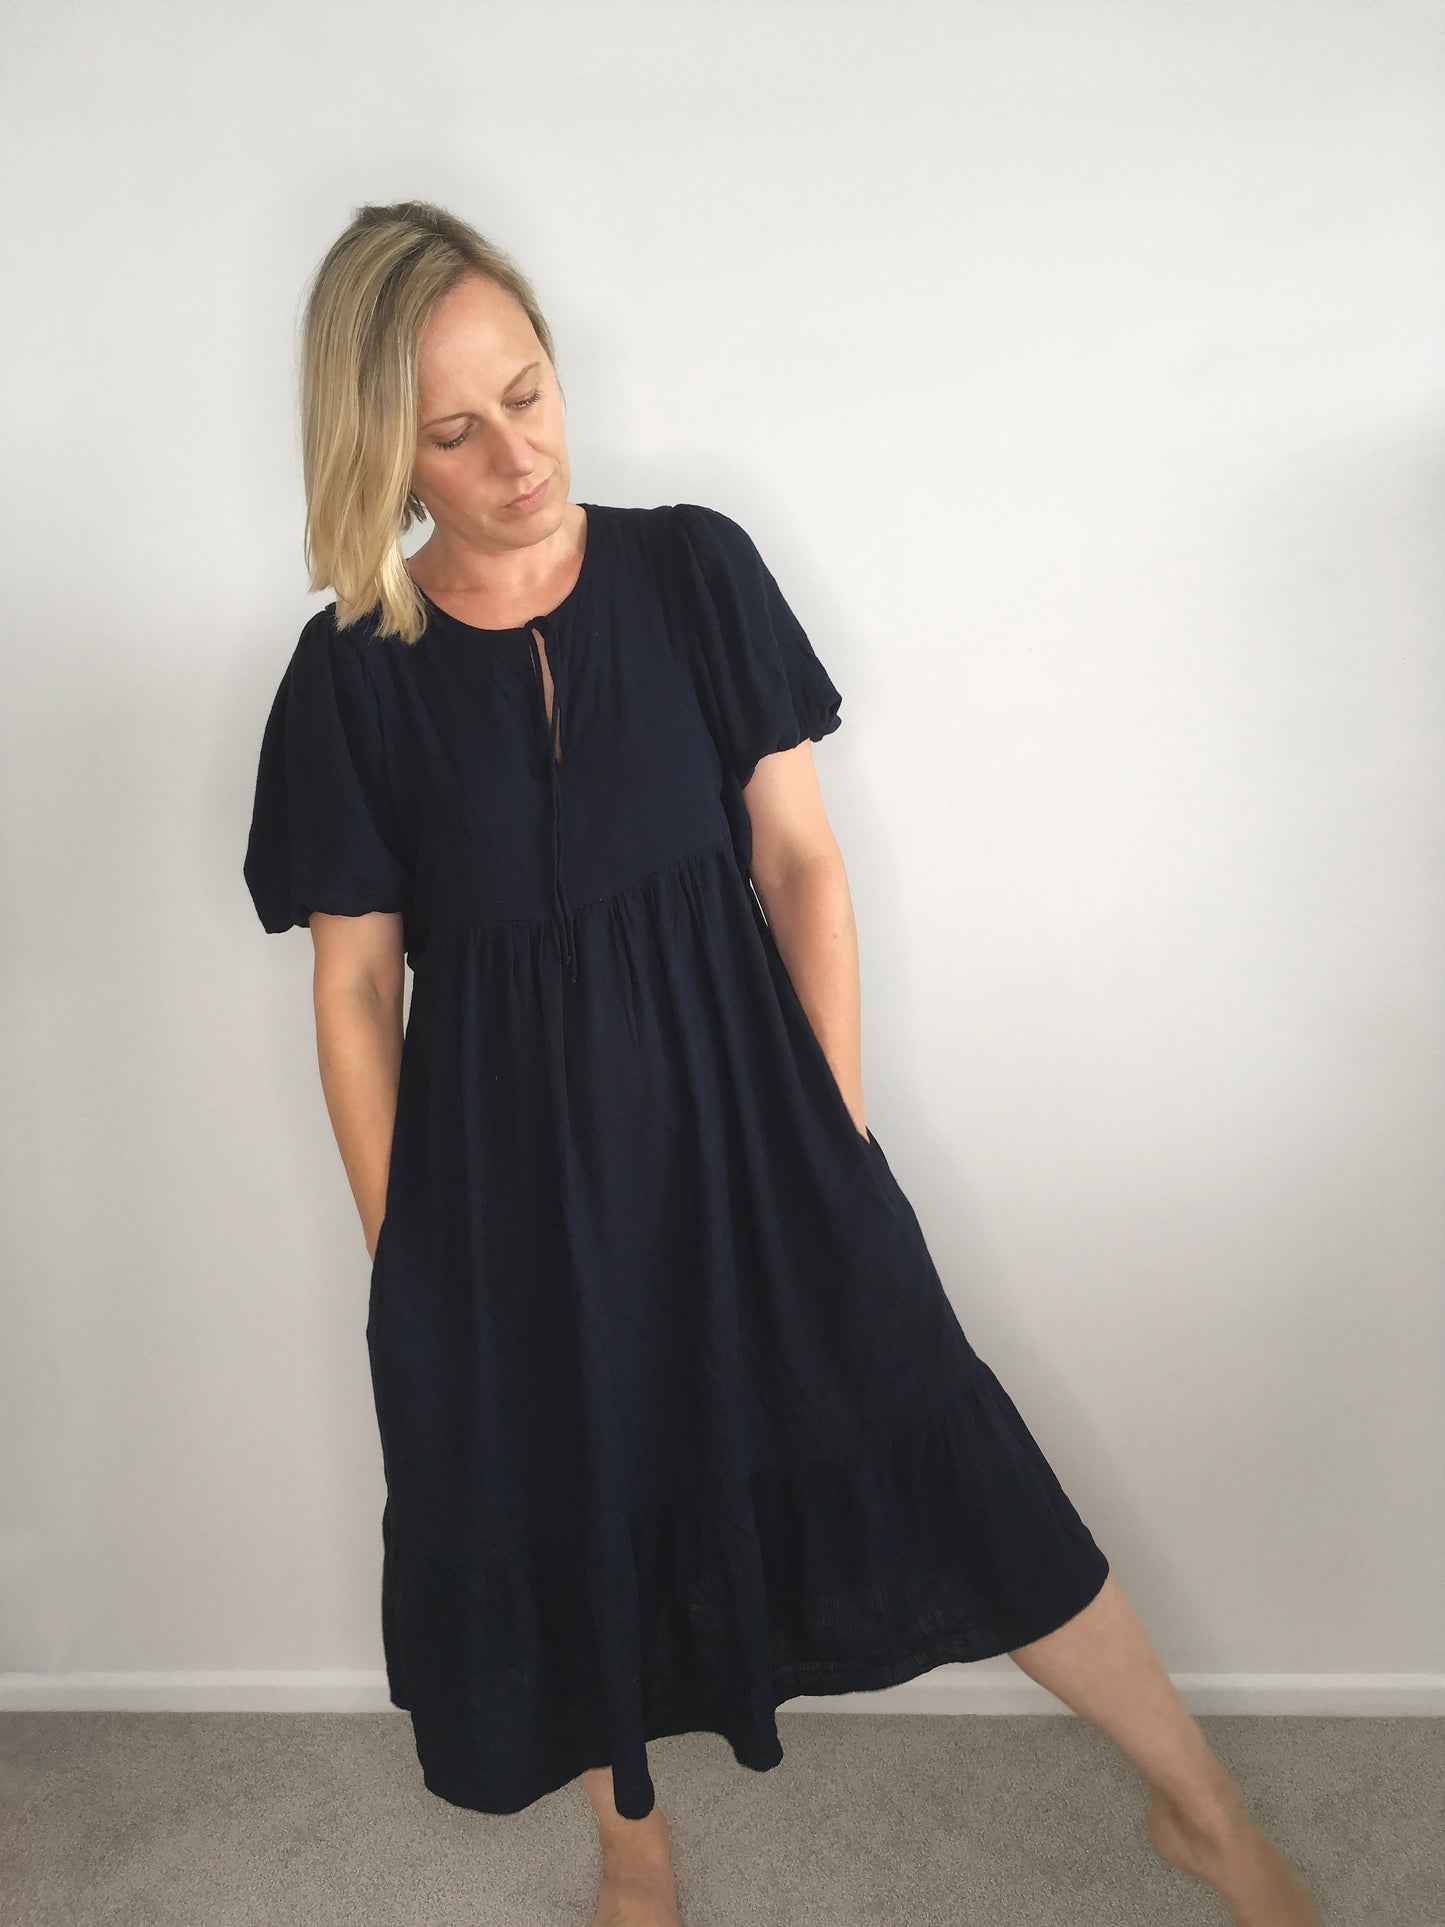 A woman wears a navy viscose dress with short puff sleeves, front tie at the neck & gathered skirt. A ruffle hem panel finishes below the knee